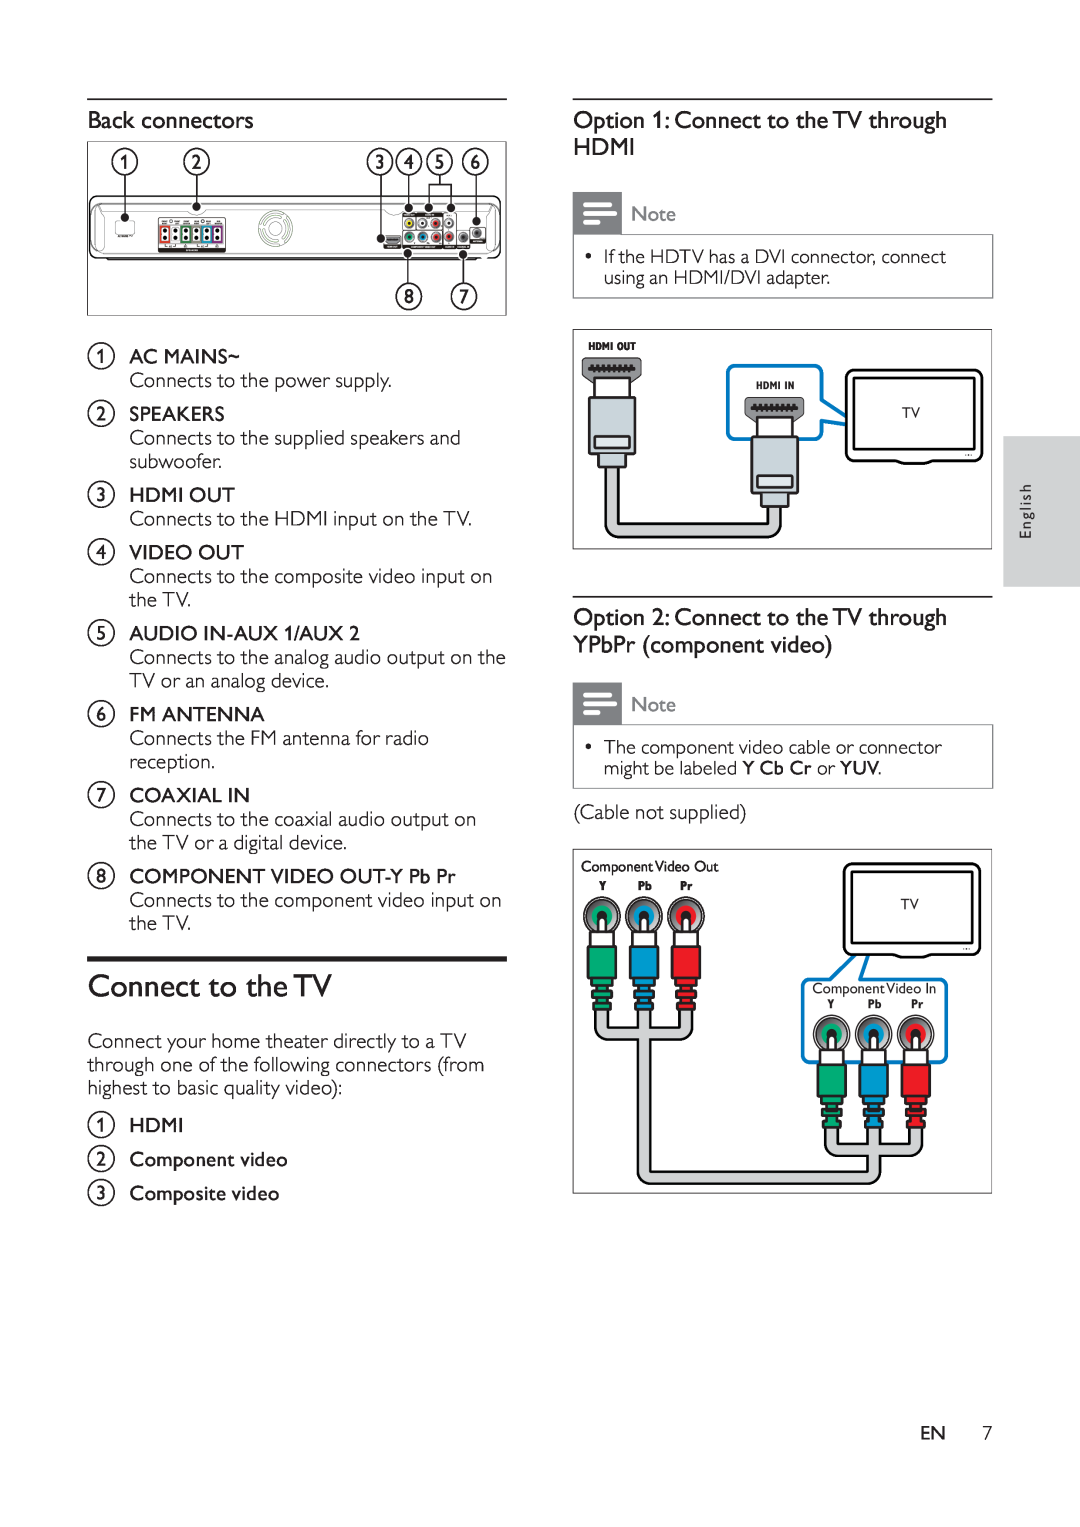 Philips HTS5530 user manual Back connectors, Option 1 Connect to theTV through HDMI 